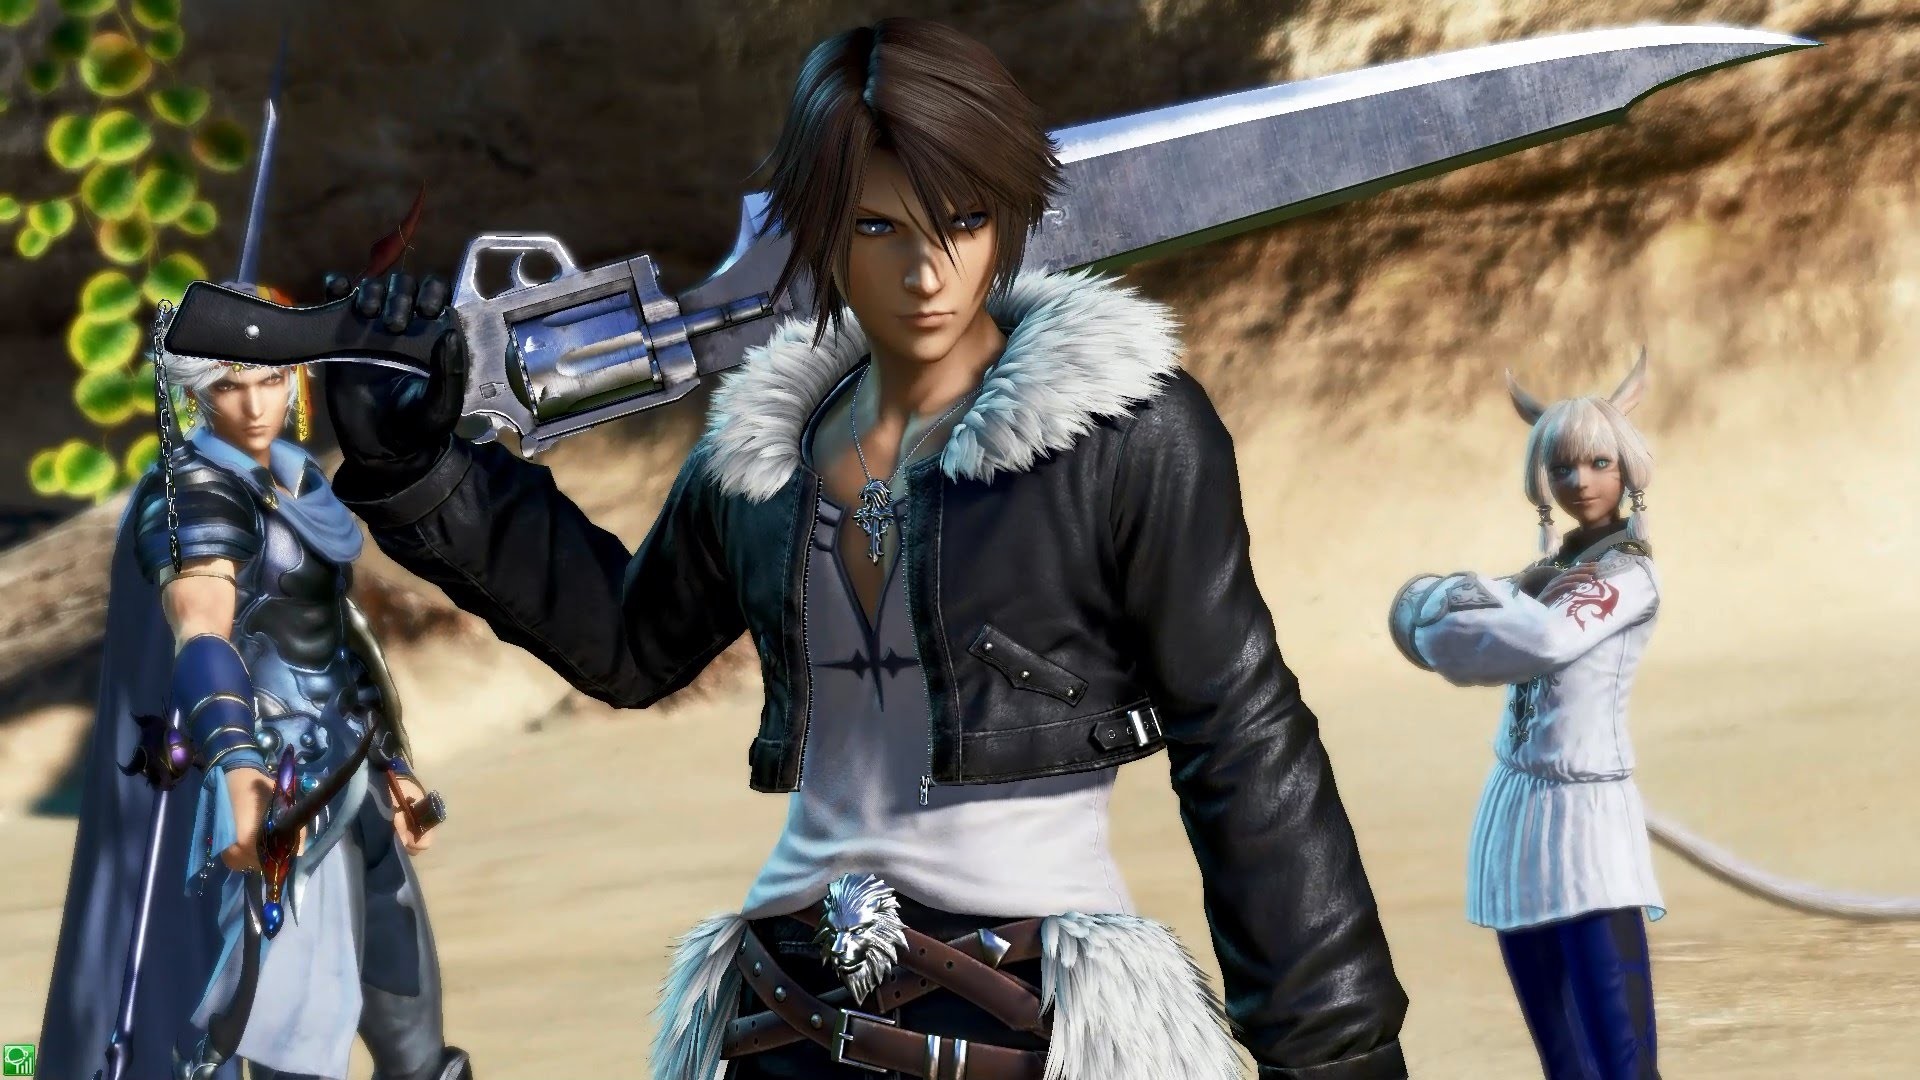 Final Fantasy VIII: How to Get Blue Hair for Squall Leonhart - wide 9